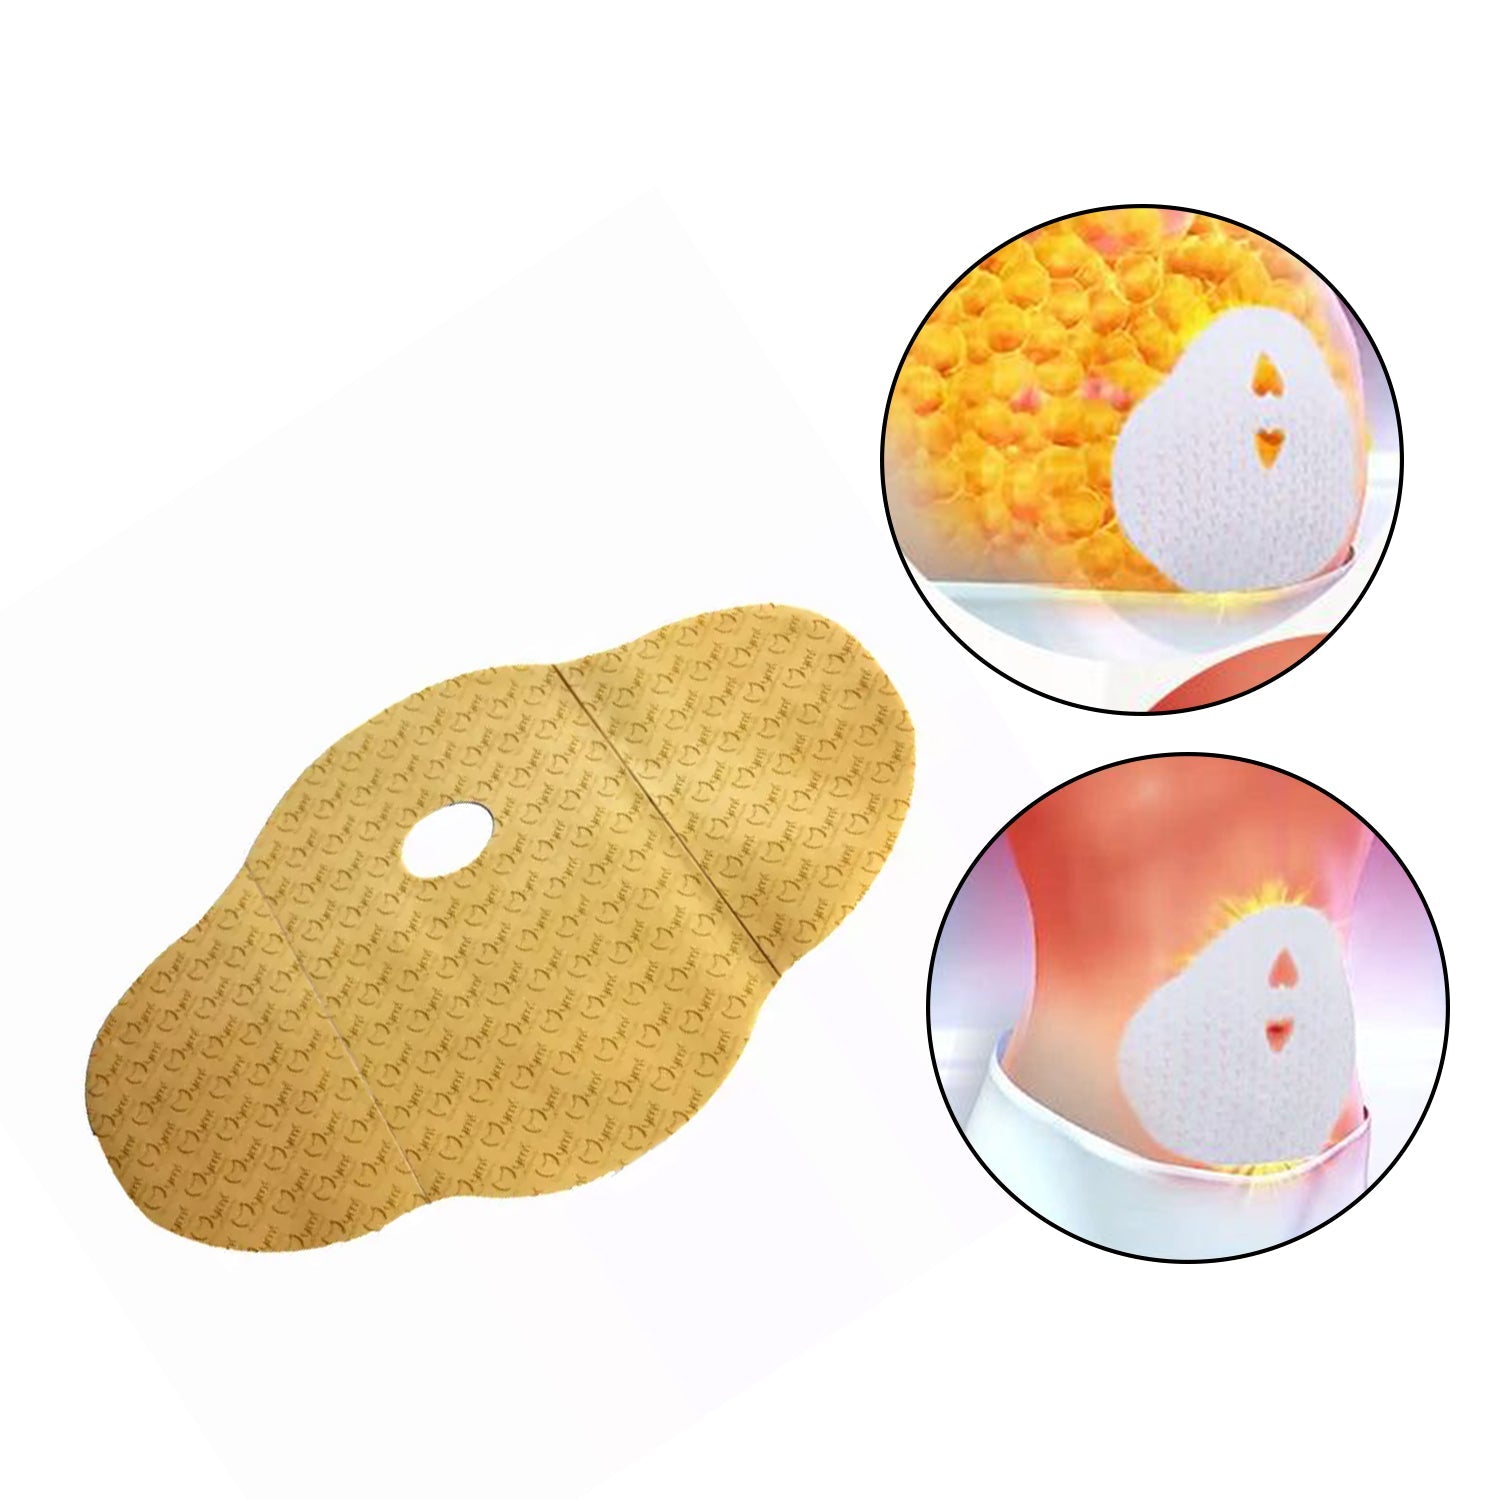 6435 Wonder Patch Quick Slimming Patch Belly Slim Patch Abdomen Fat burning Navel Stick Slimer Face Lift Tool DeoDap